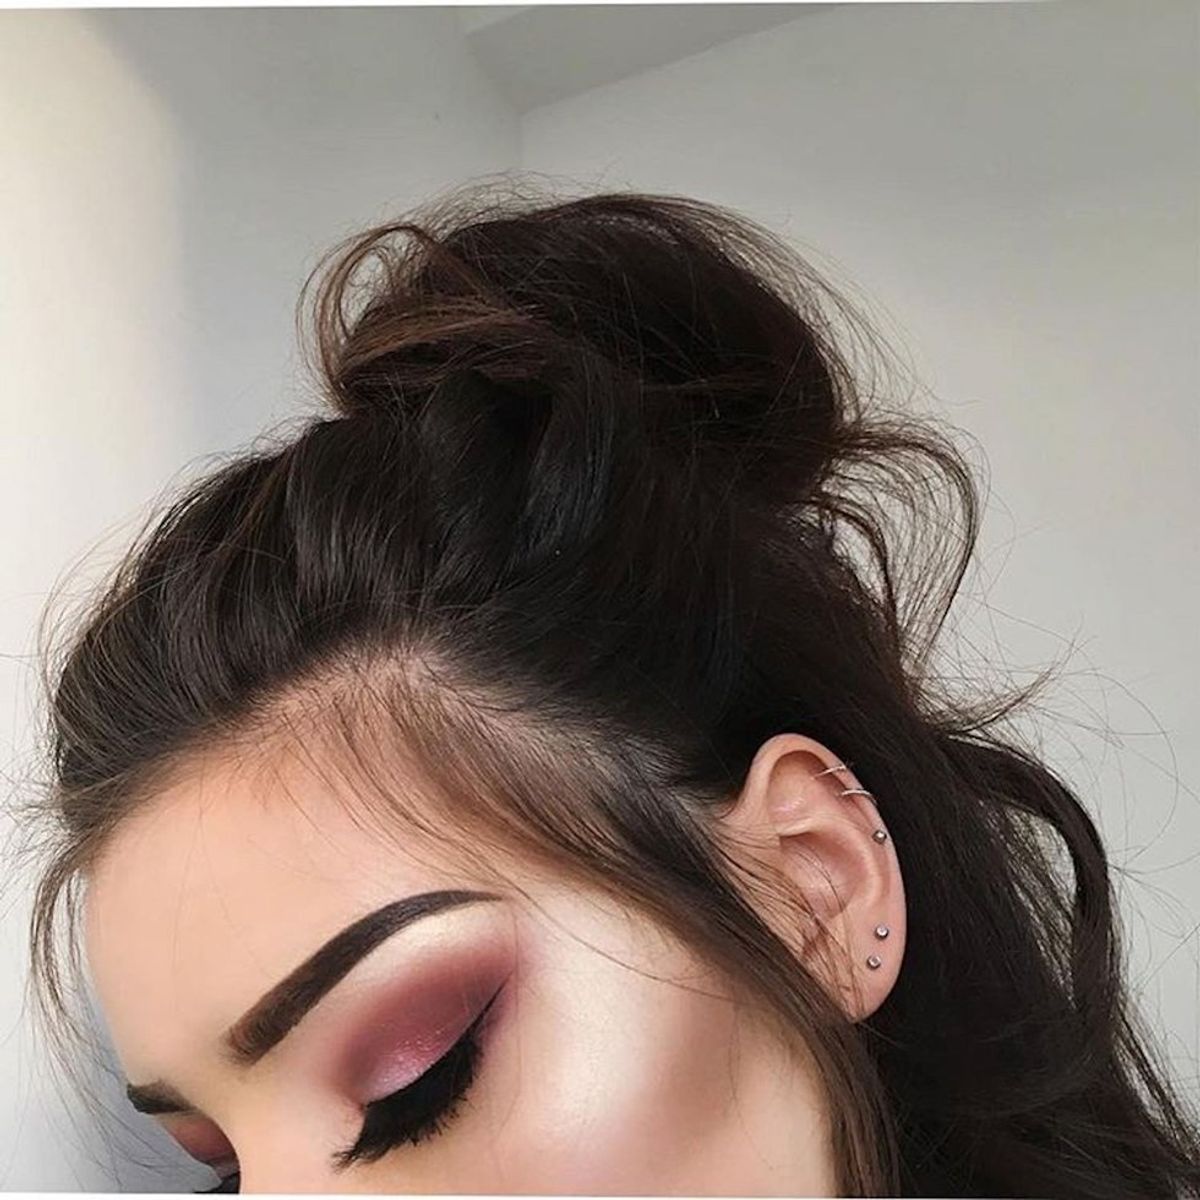 Watch: 10 Makeup Artists You NEED To Be Following On Instagram